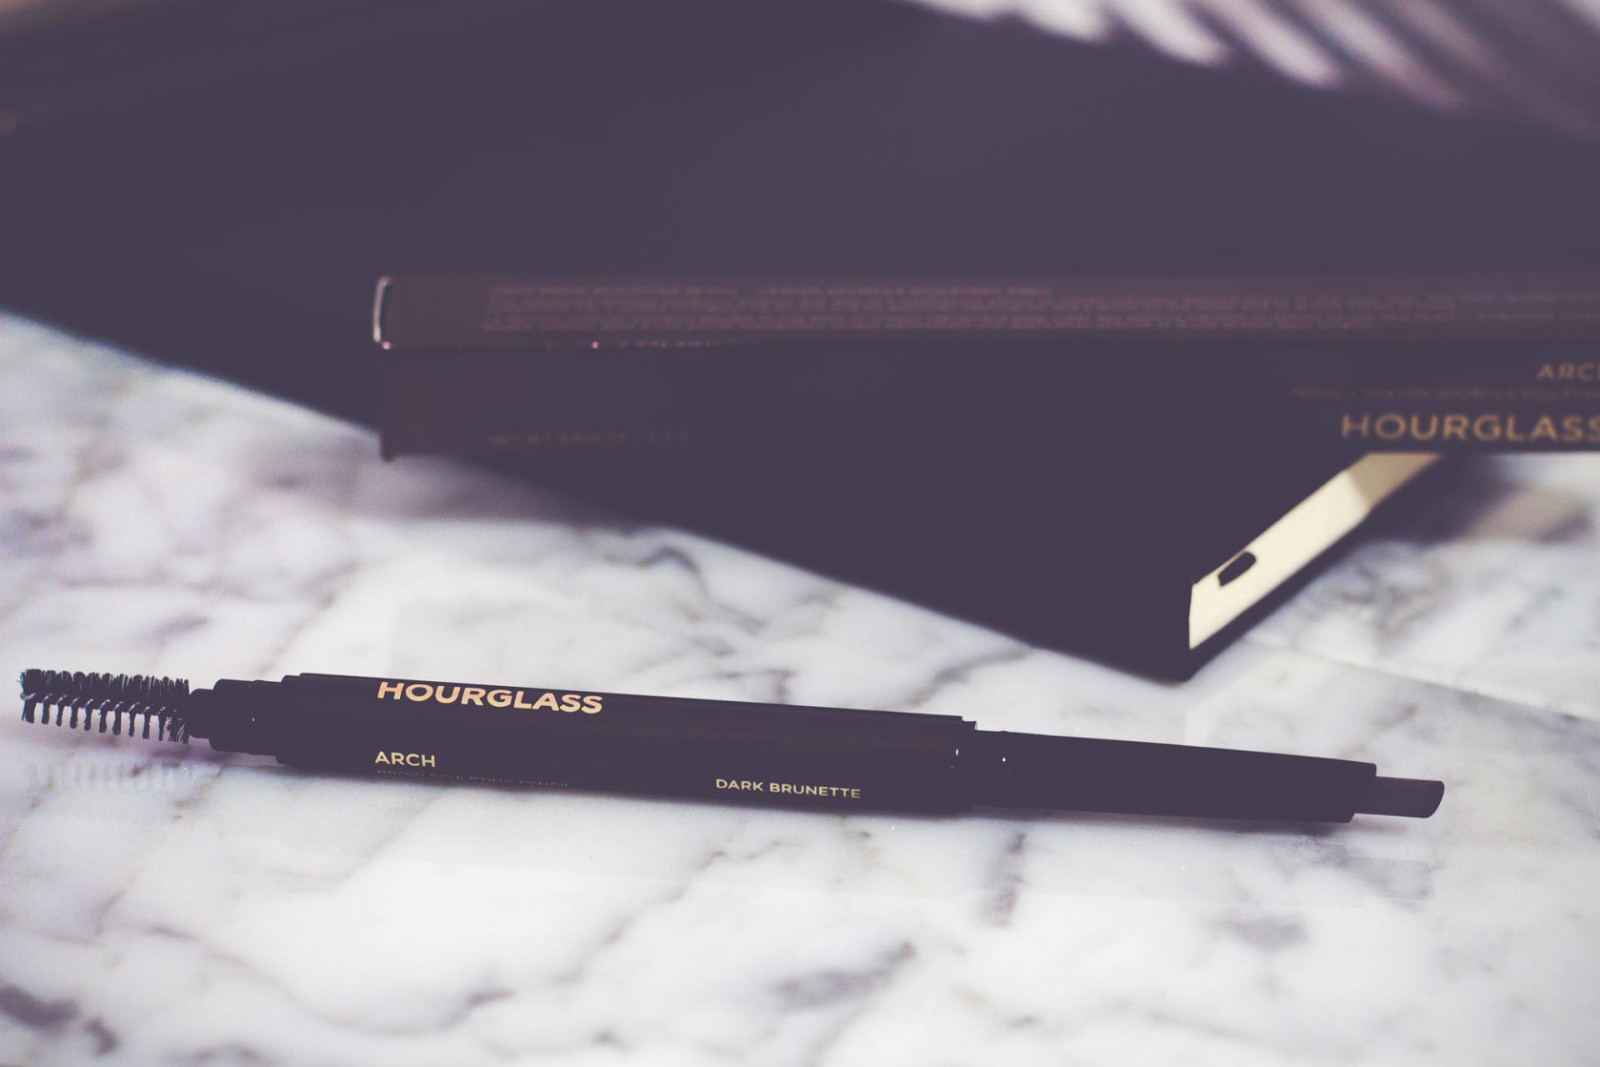 HourGlass Arch Brow Sculpting Pencil |BeingMelody.com| @BeingMelody (3 of 6)